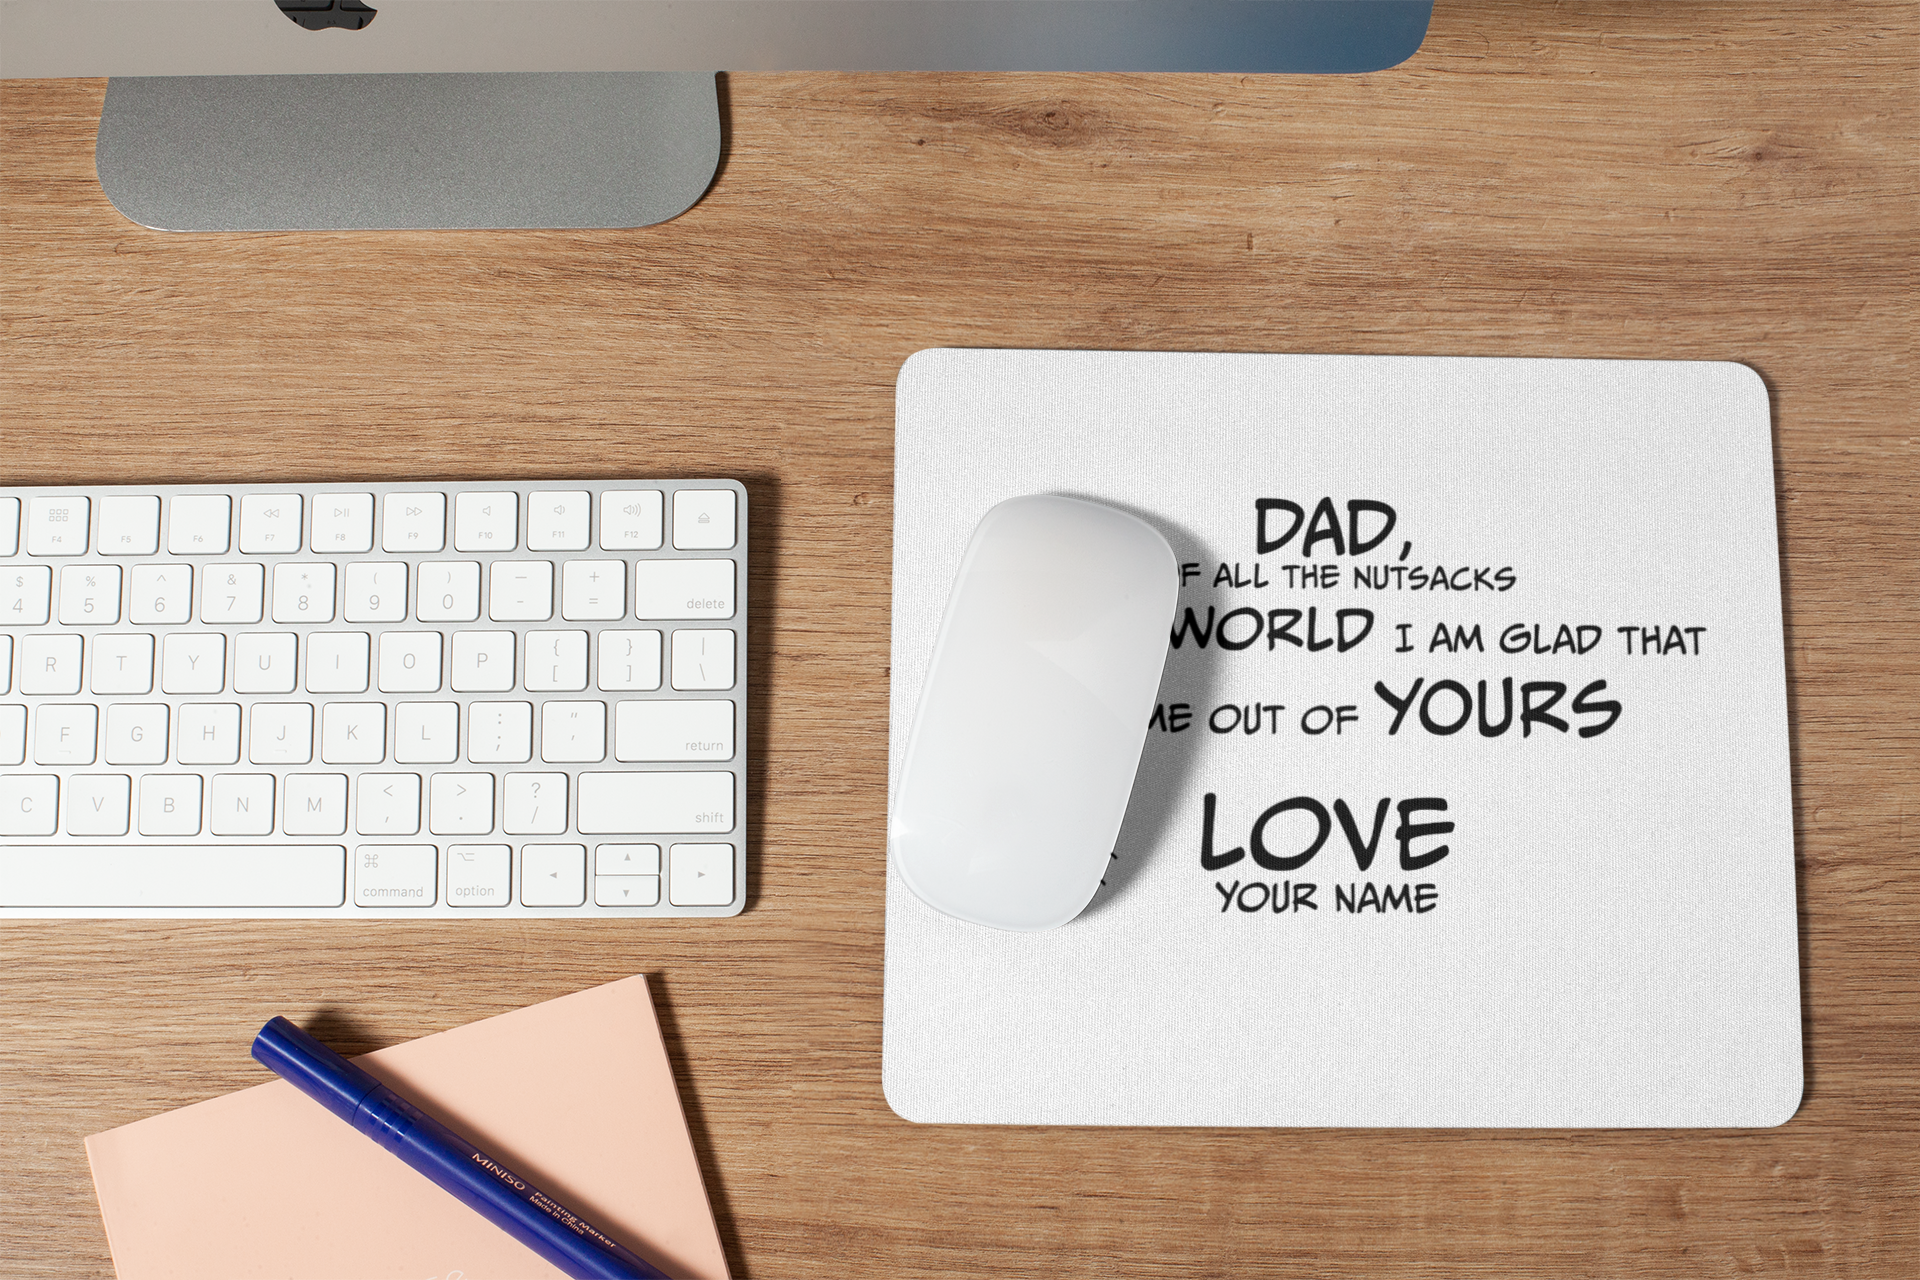 Dad, of all the nutsacks in the world, I am glad that I came out of yours Mouse pad ball sax ballsack ballsax dad dads day dads day gift Fahters day fathers fathers day funny mouse pad gift for dad gift for him mouse pad nut sack nut sax nutz super dad